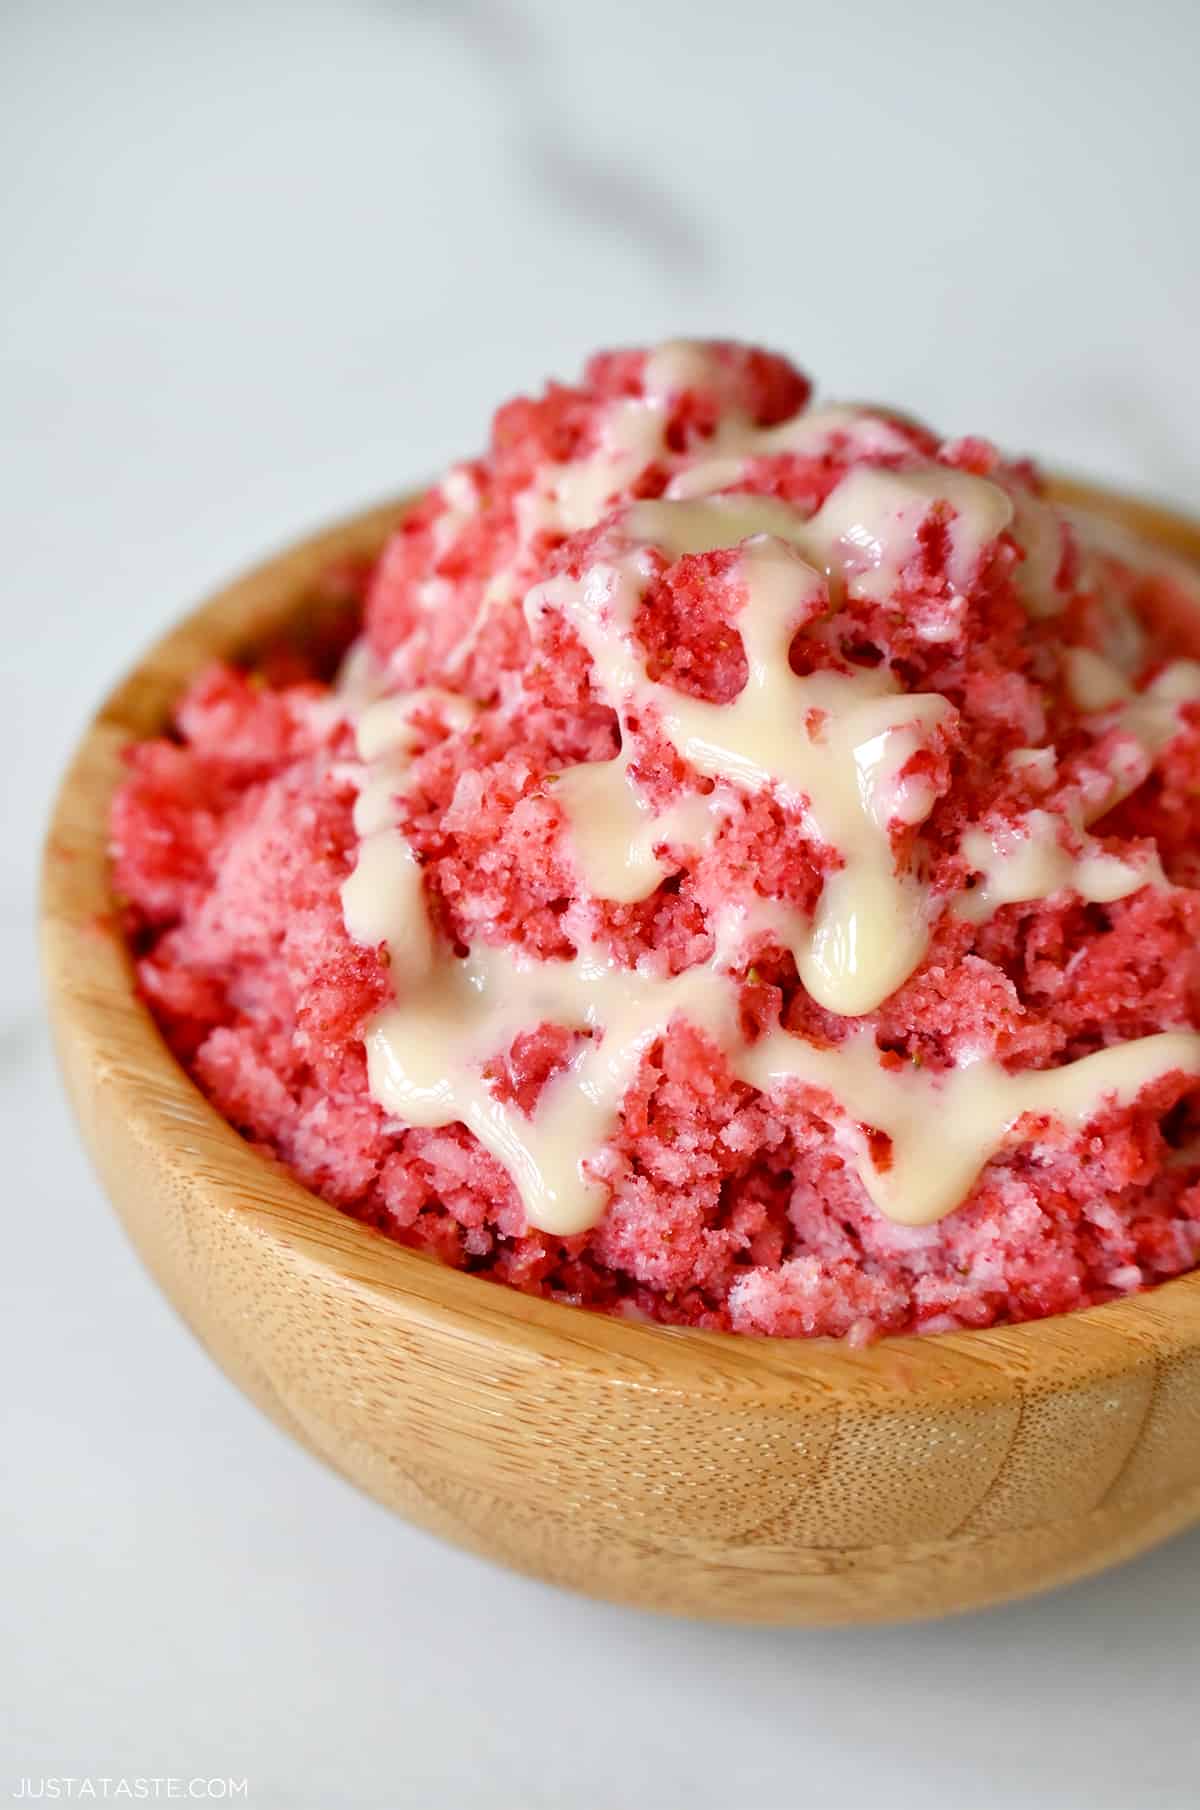 A wood bowl containing strawberry shaved ice with drizzled sweetened condensed milk